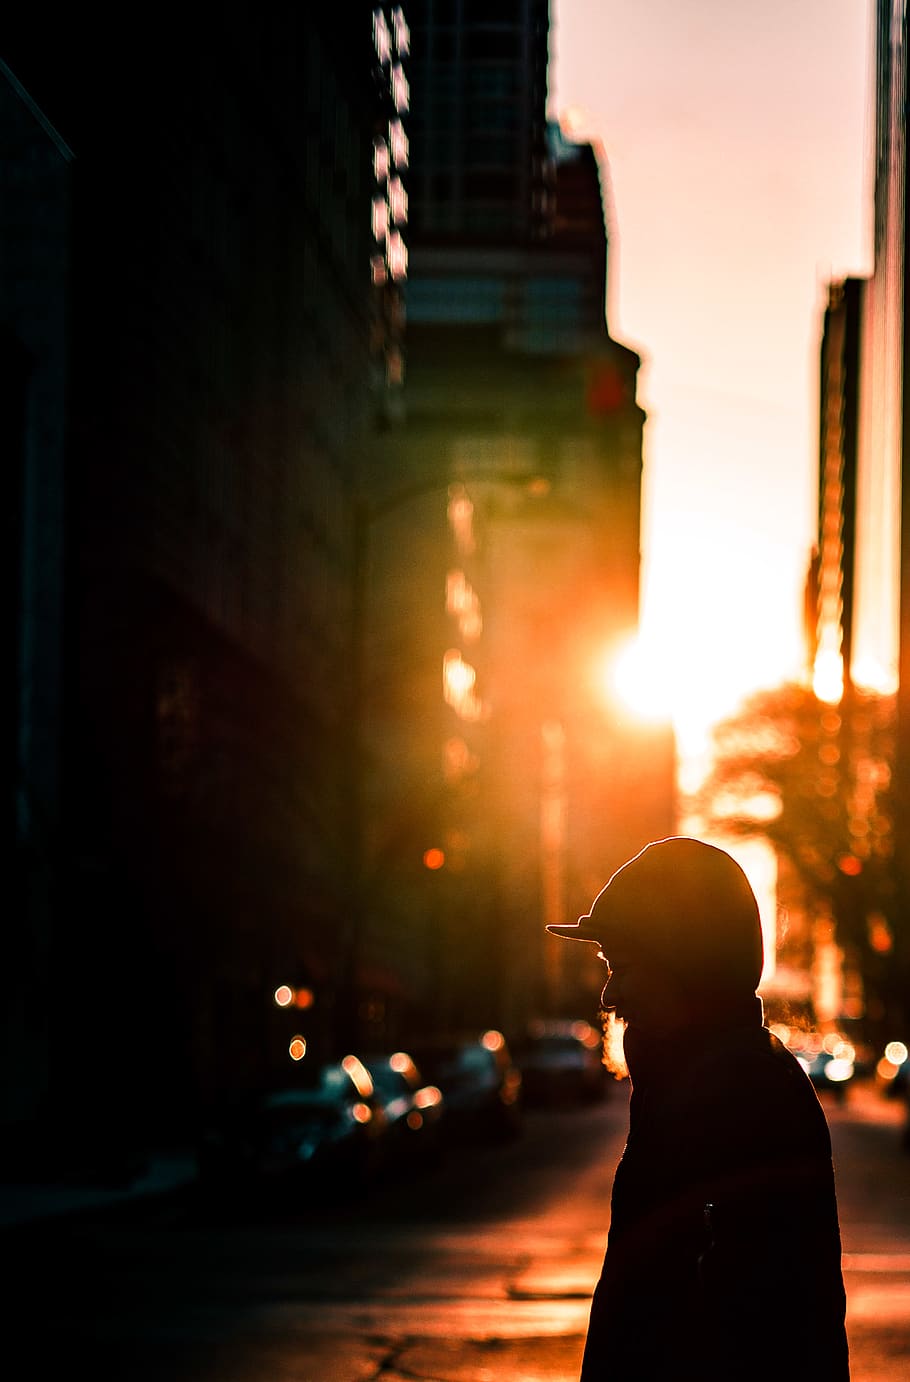 HD wallpaper: Silhouette Of Person During Dawn, backlit, blur, city ...